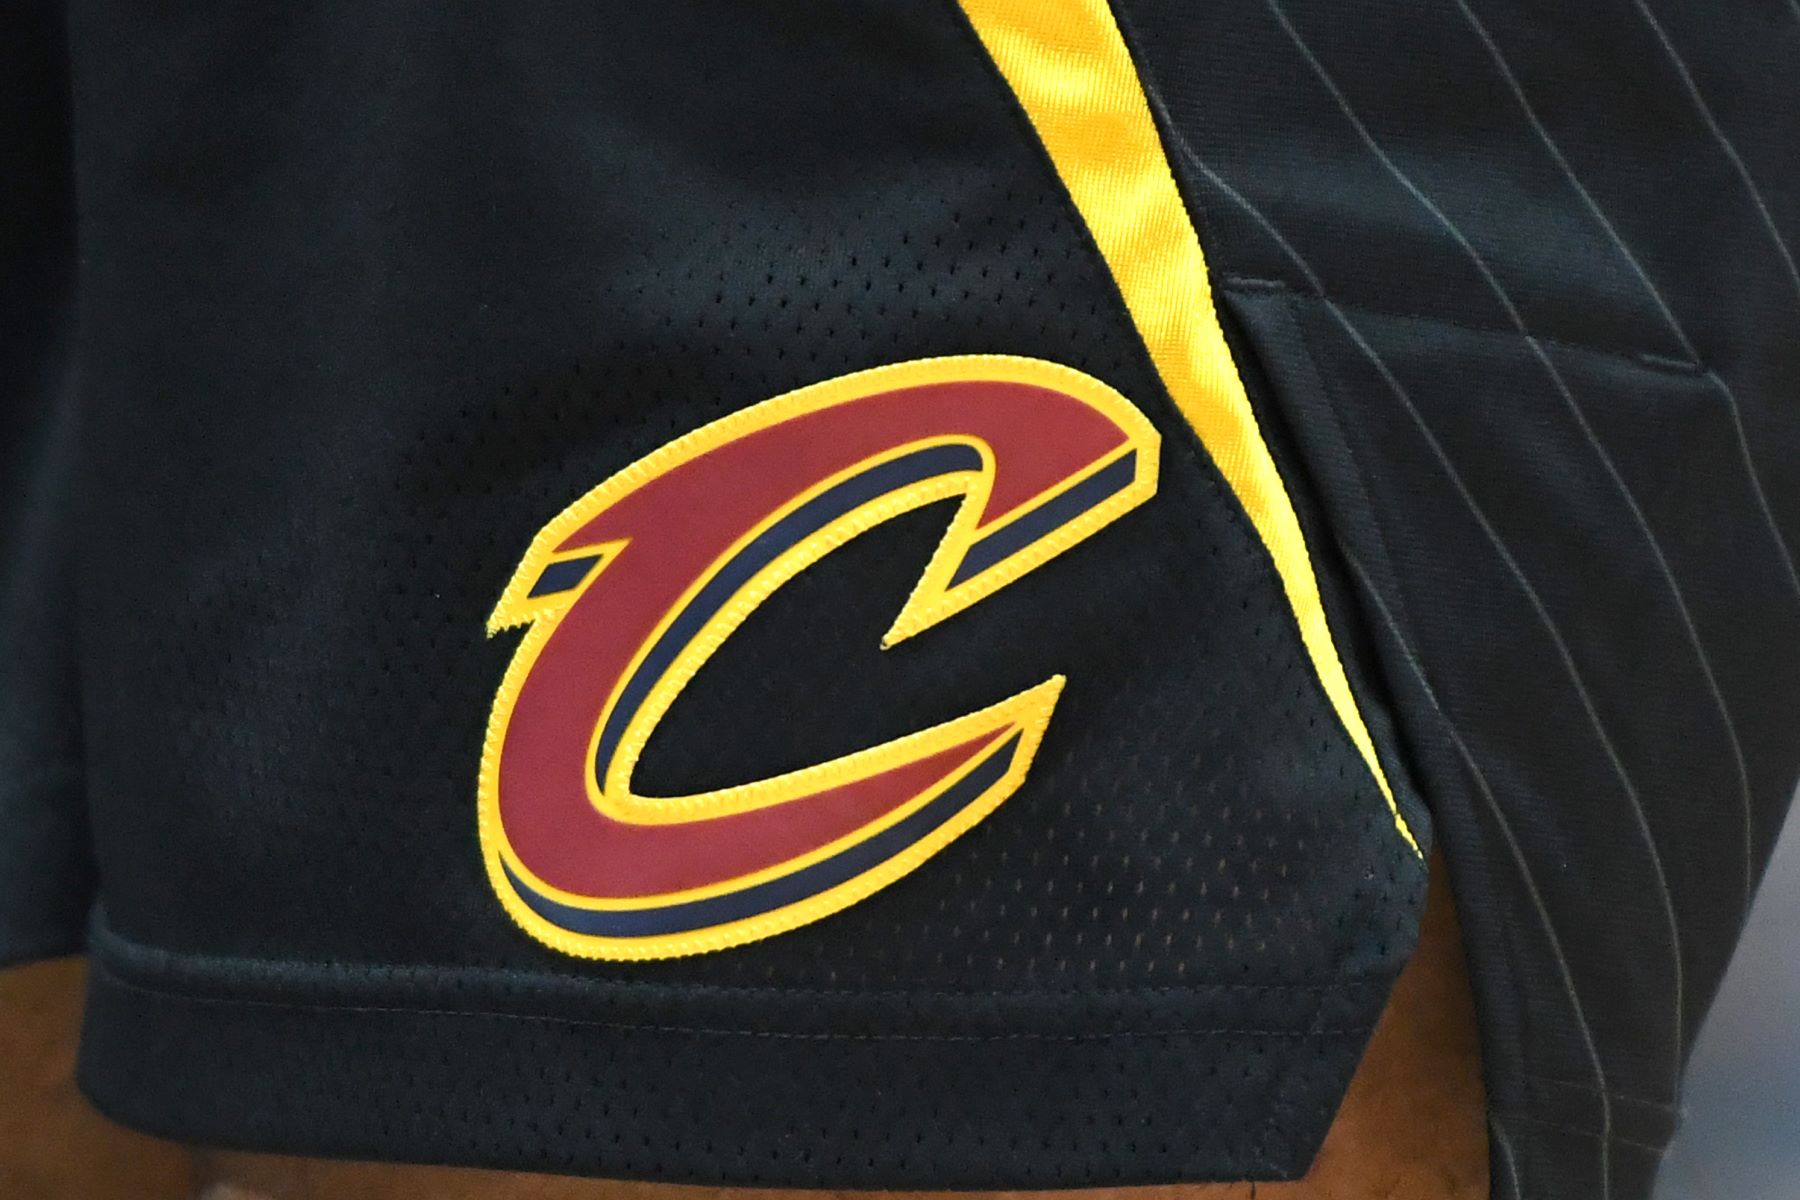 NBA team Cleveland Cavaliers logo on the uniform shorts during a game against the Washington Wizards